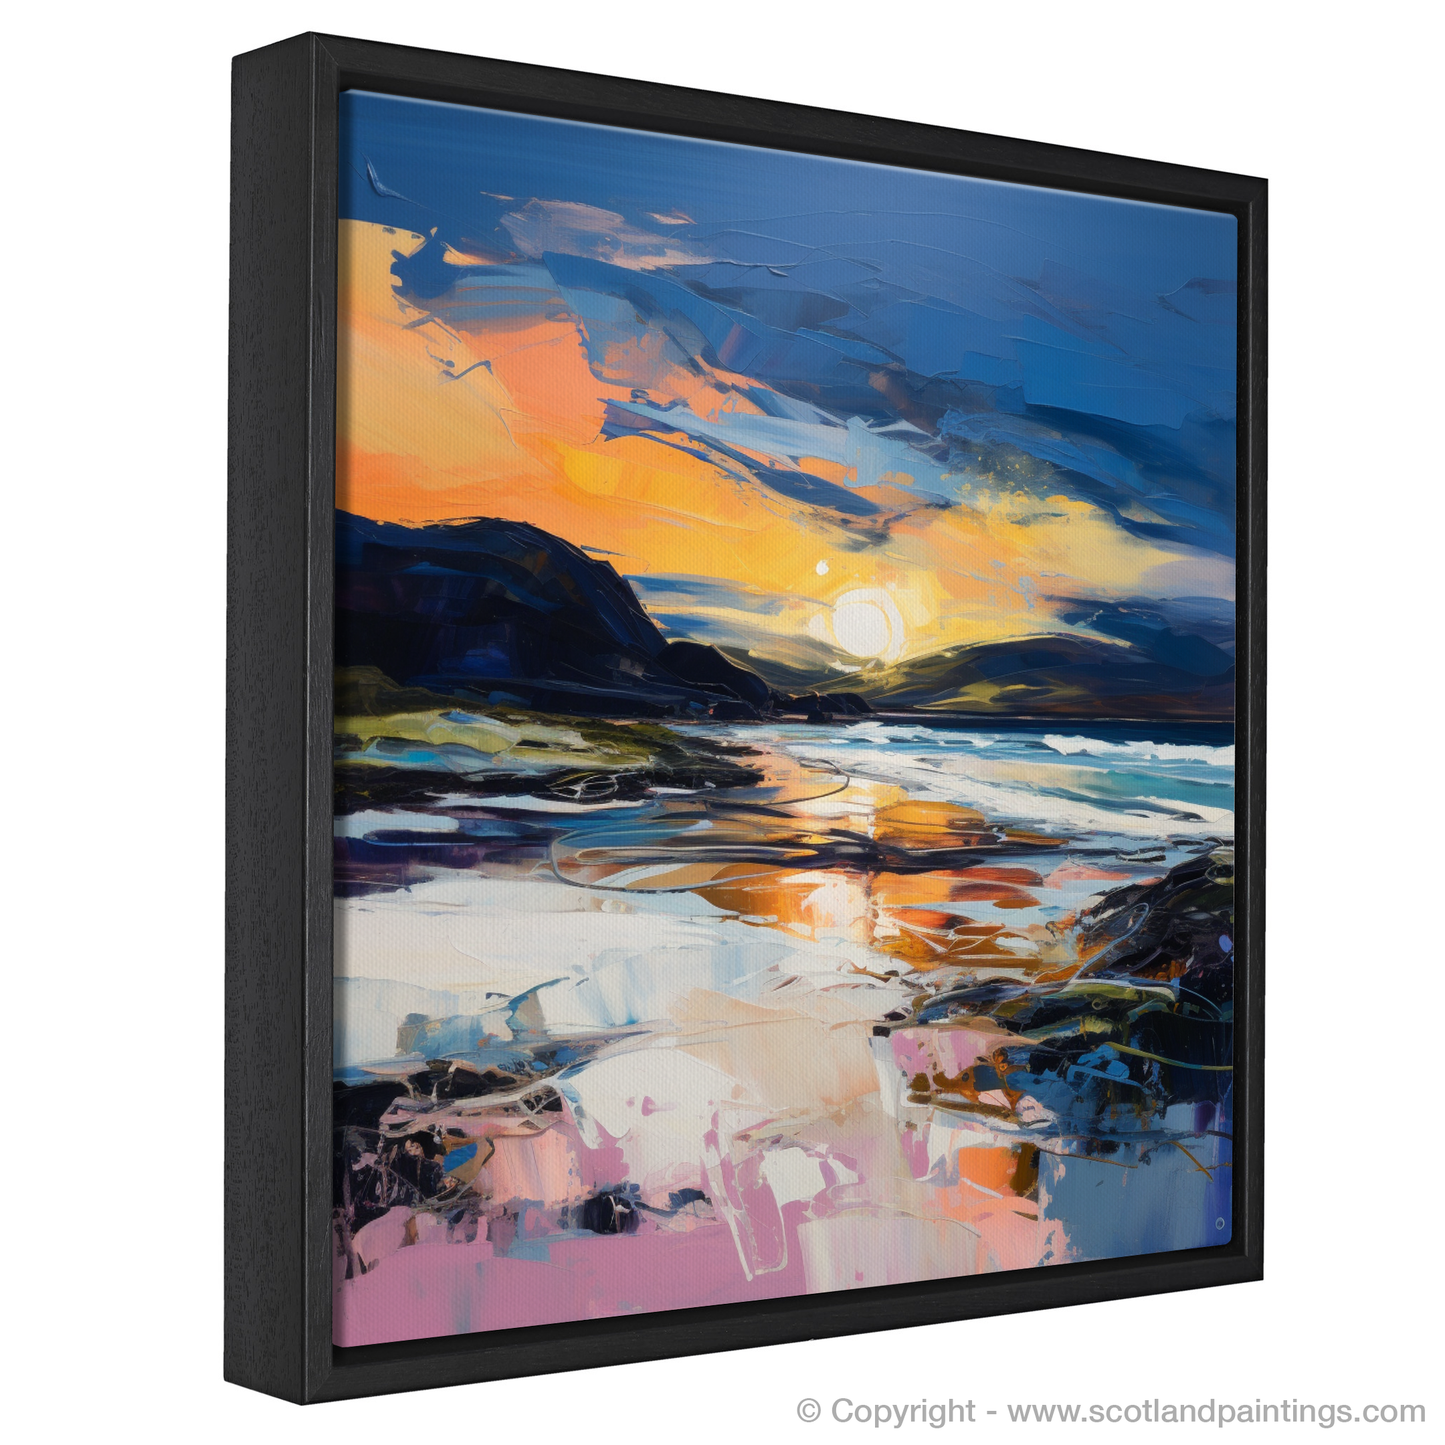 Painting and Art Print of Scarista Beach at dusk entitled "Dusk's Embrace at Scarista Beach".